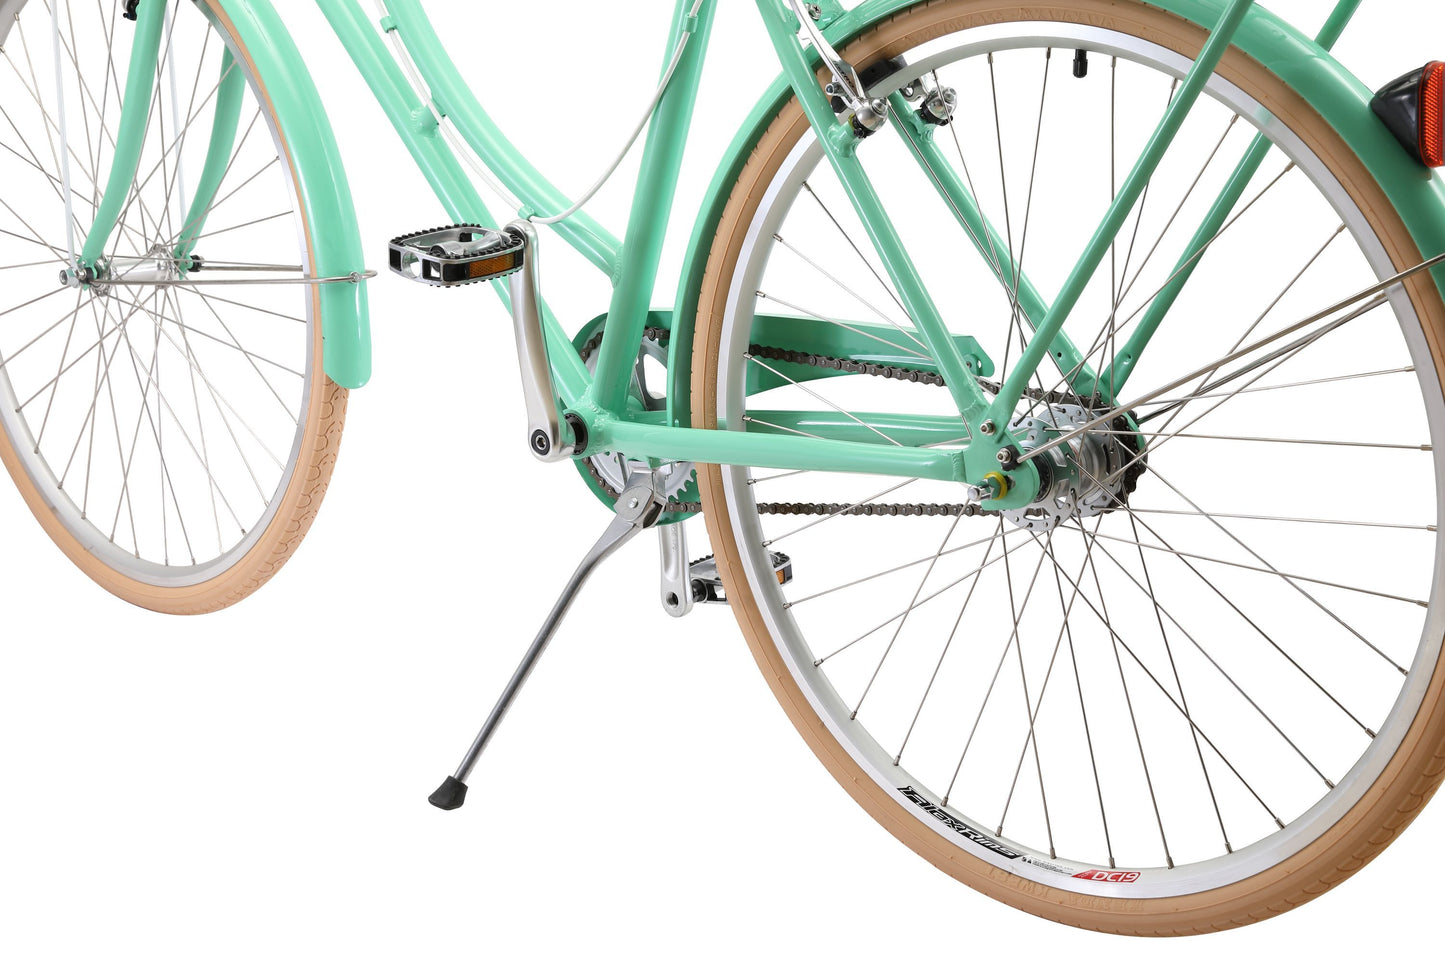 Ladies Deluxe Vintage Bike in Mint Green featuring alloy kickstand from Reid Cycles Australia